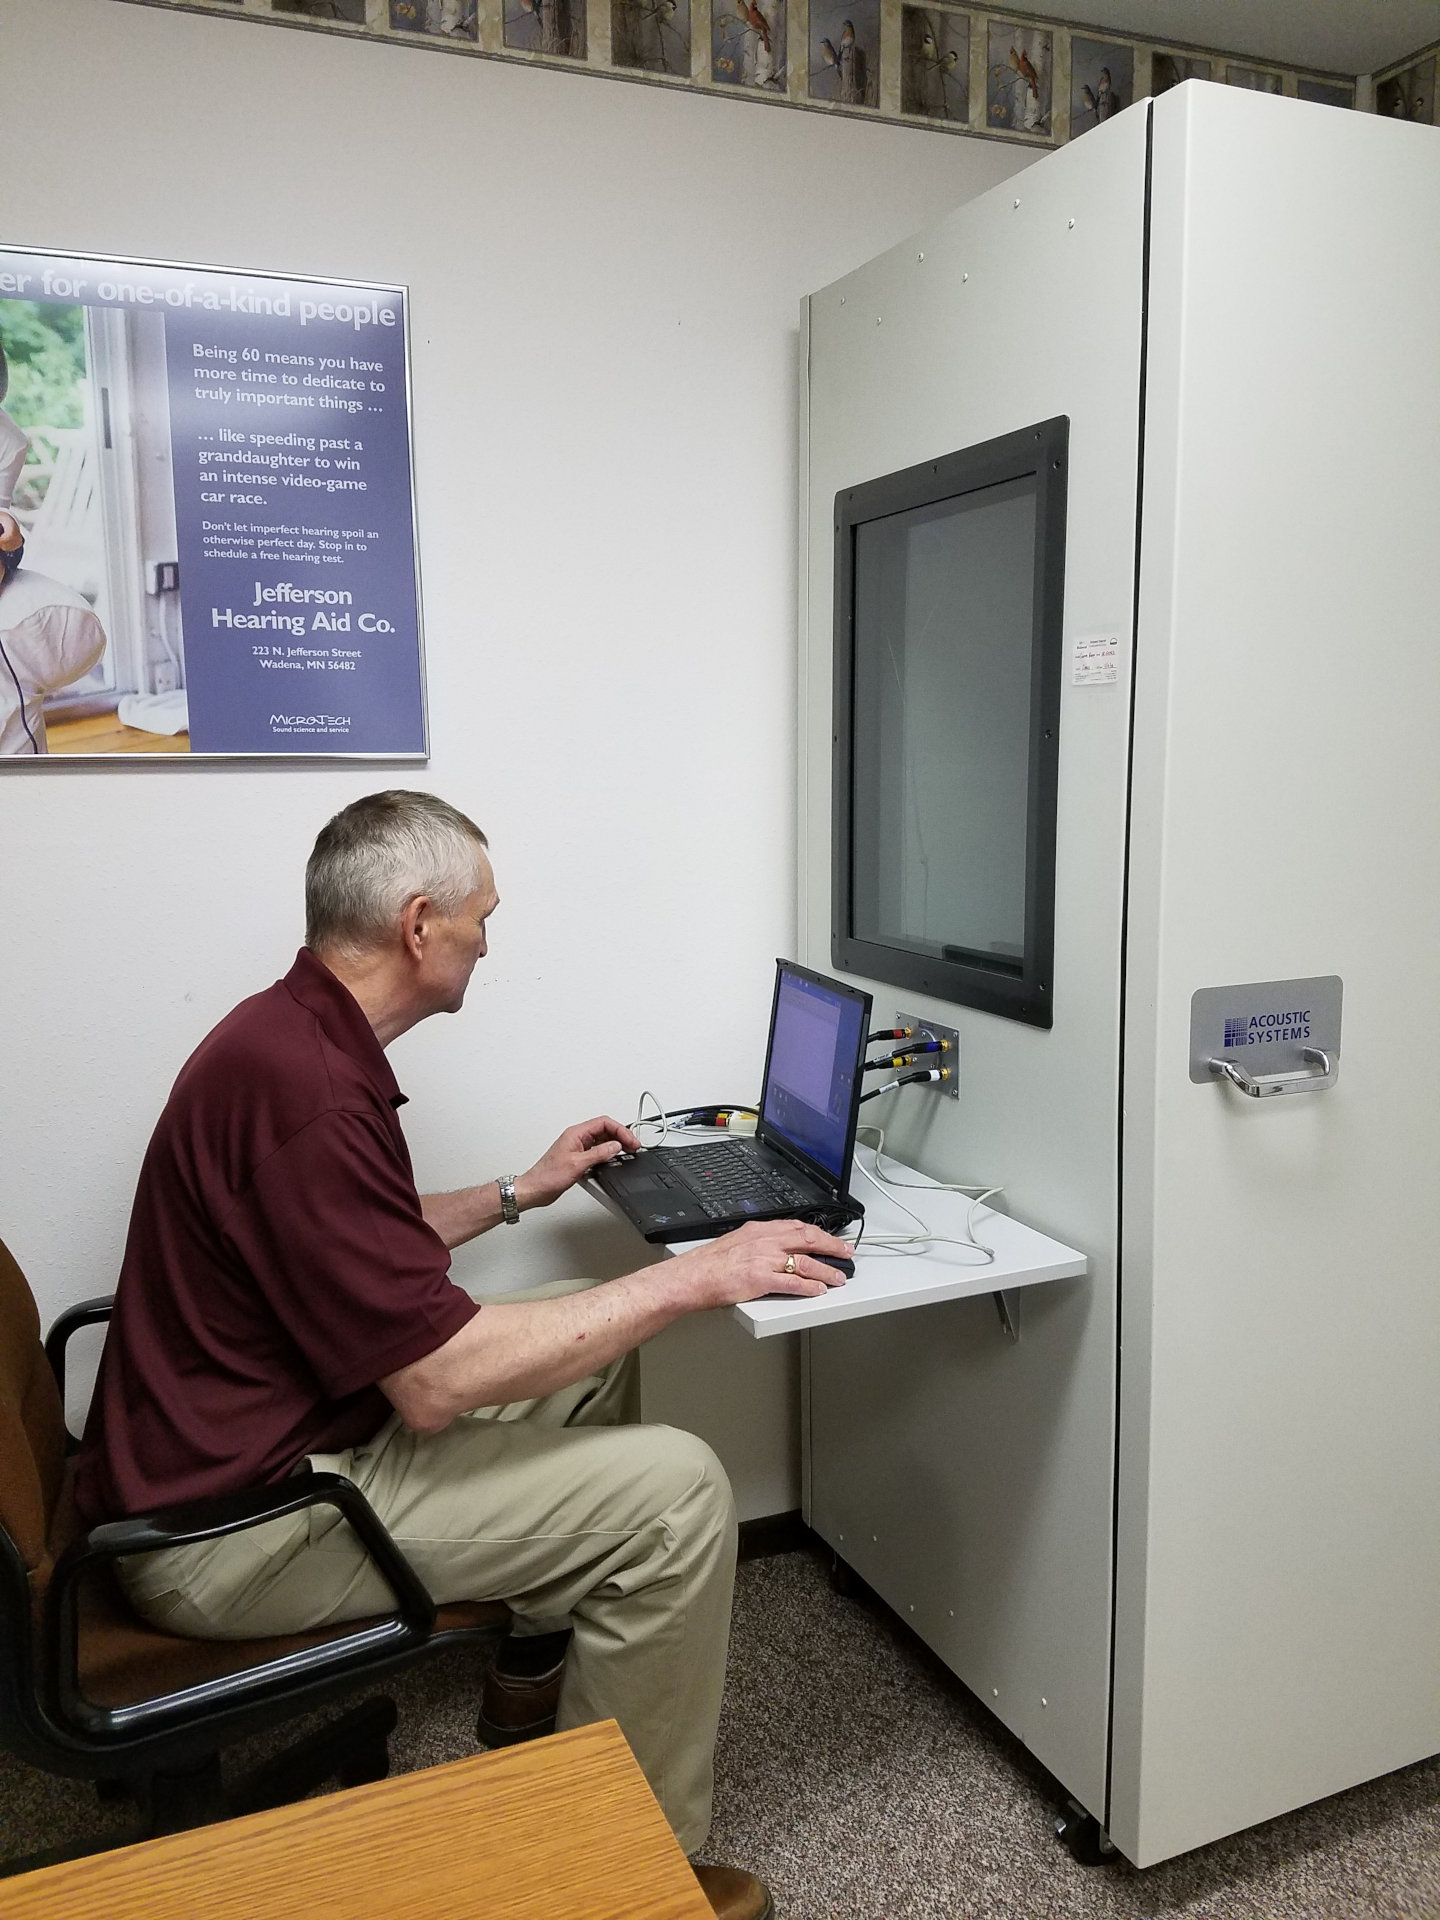 hearing specialist working at laptop in front of hearing test booth window